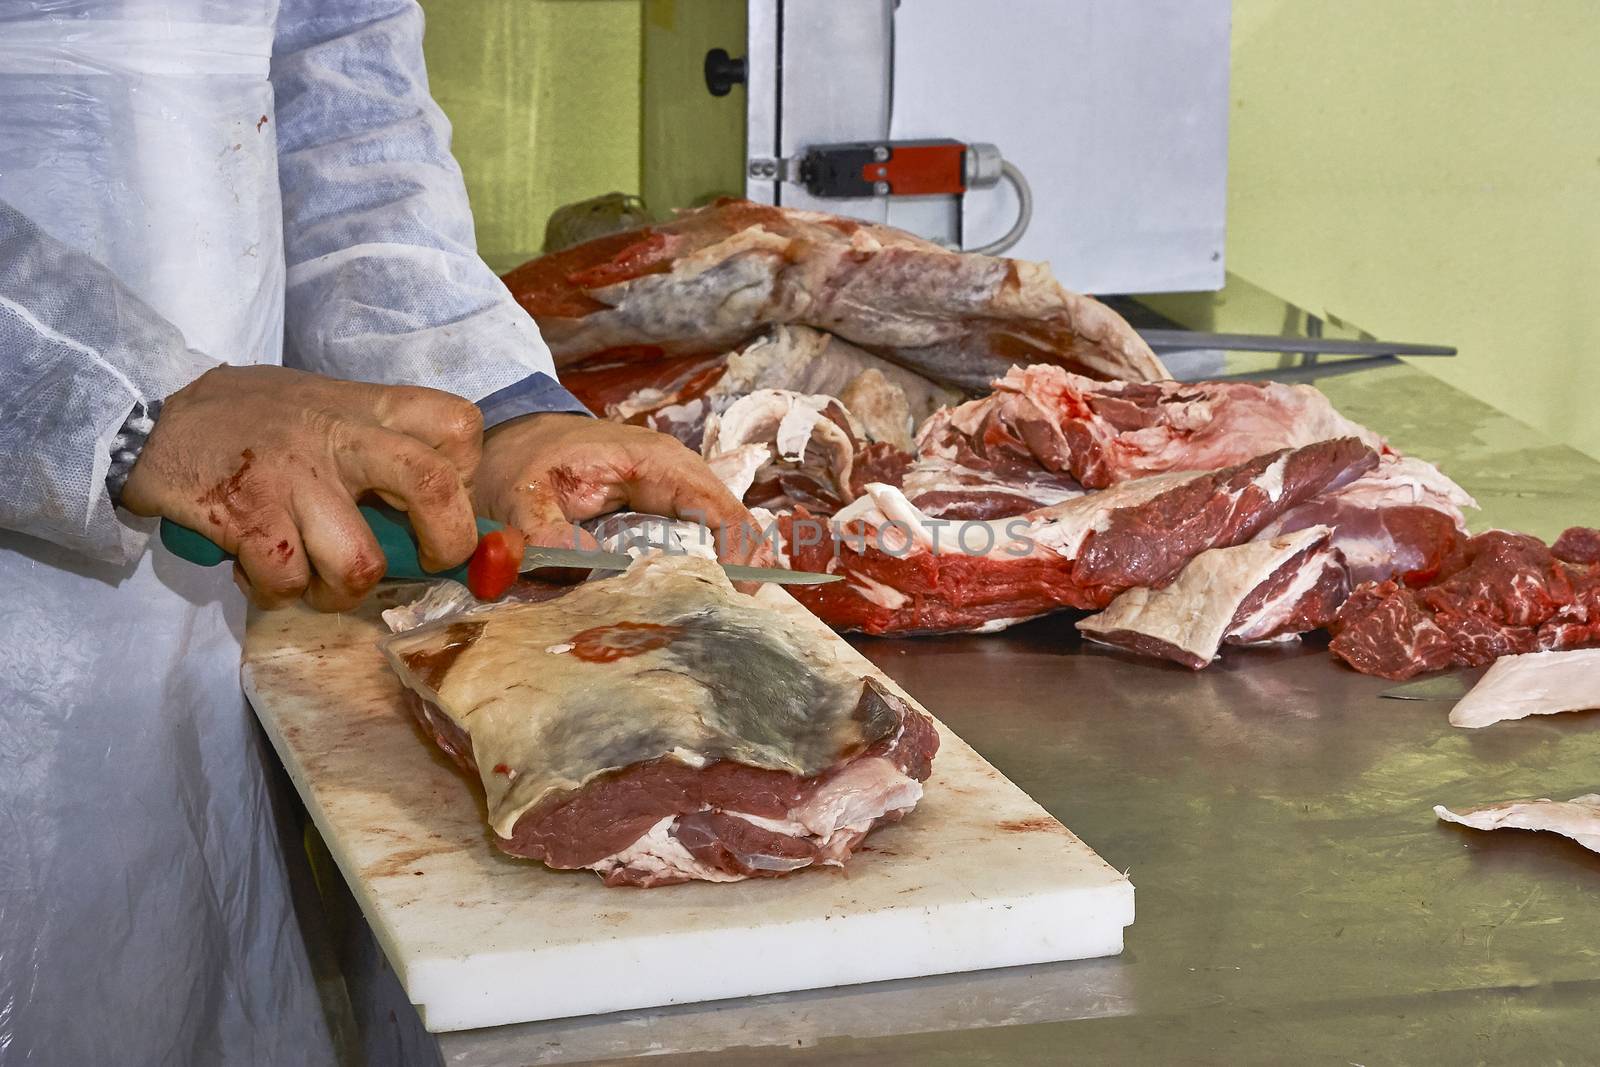 Butcher removing fat from a meat cut by pippocarlot